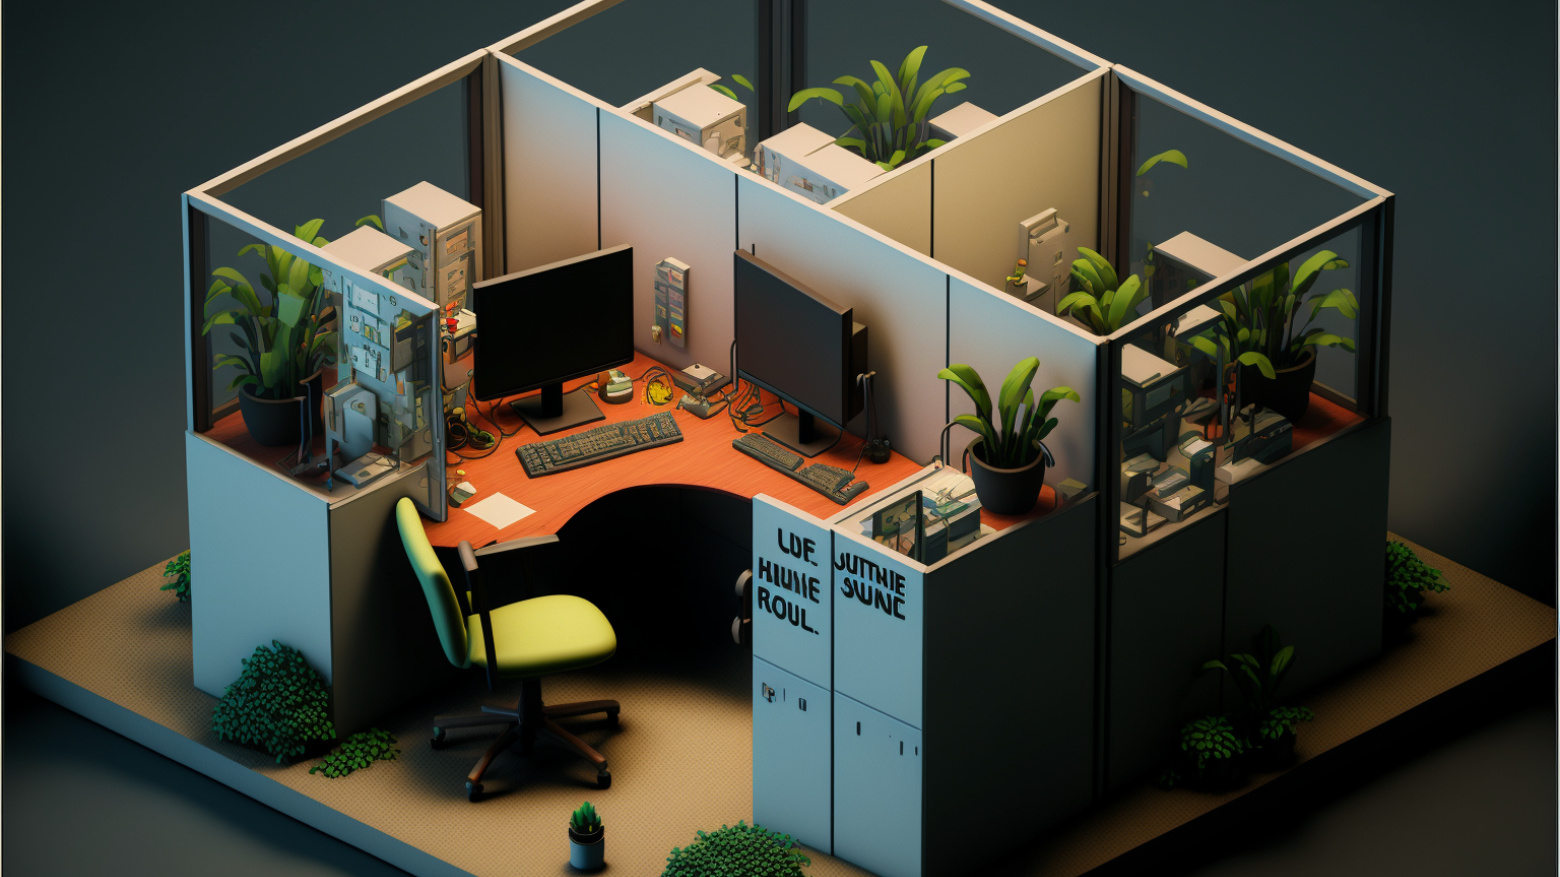 cubicle office in the style of a platform game